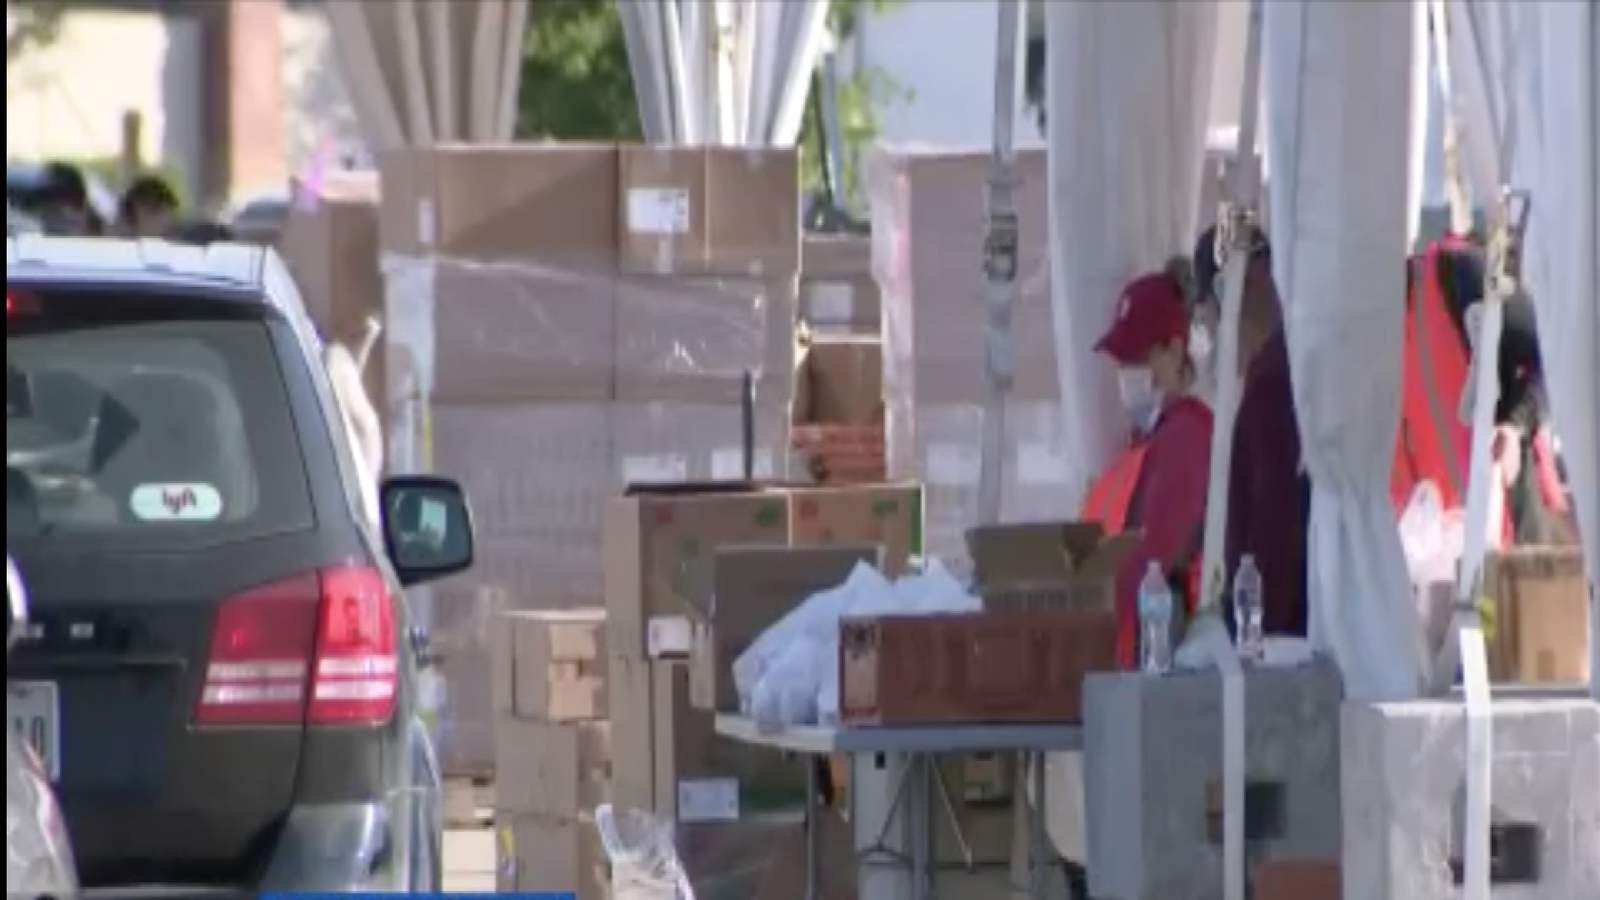 Houston Food Bank, Cy-Hope feeds thousands in need at free food distribution in Cypress